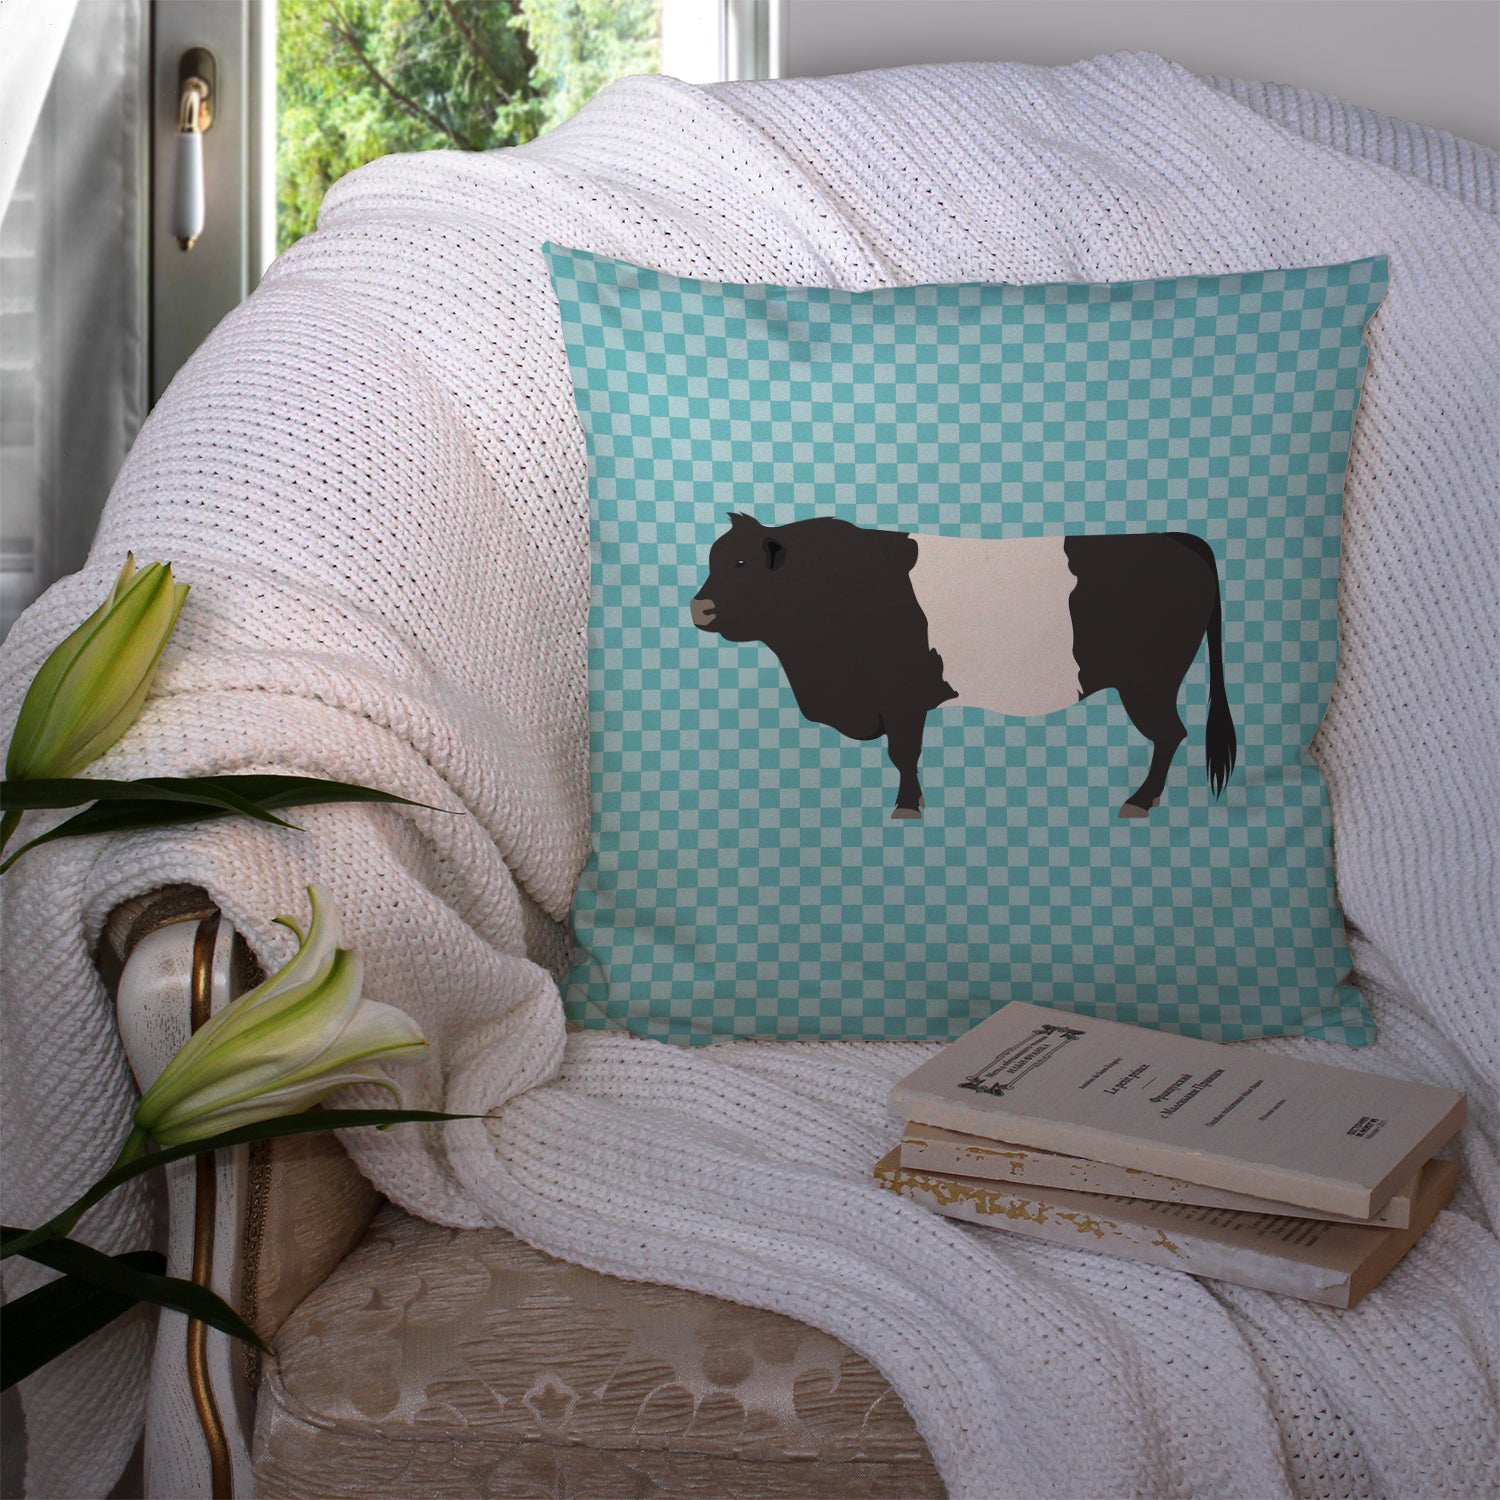 Belted Galloway Cow Blue Check Fabric Decorative Pillow BB8005PW1414 - the-store.com